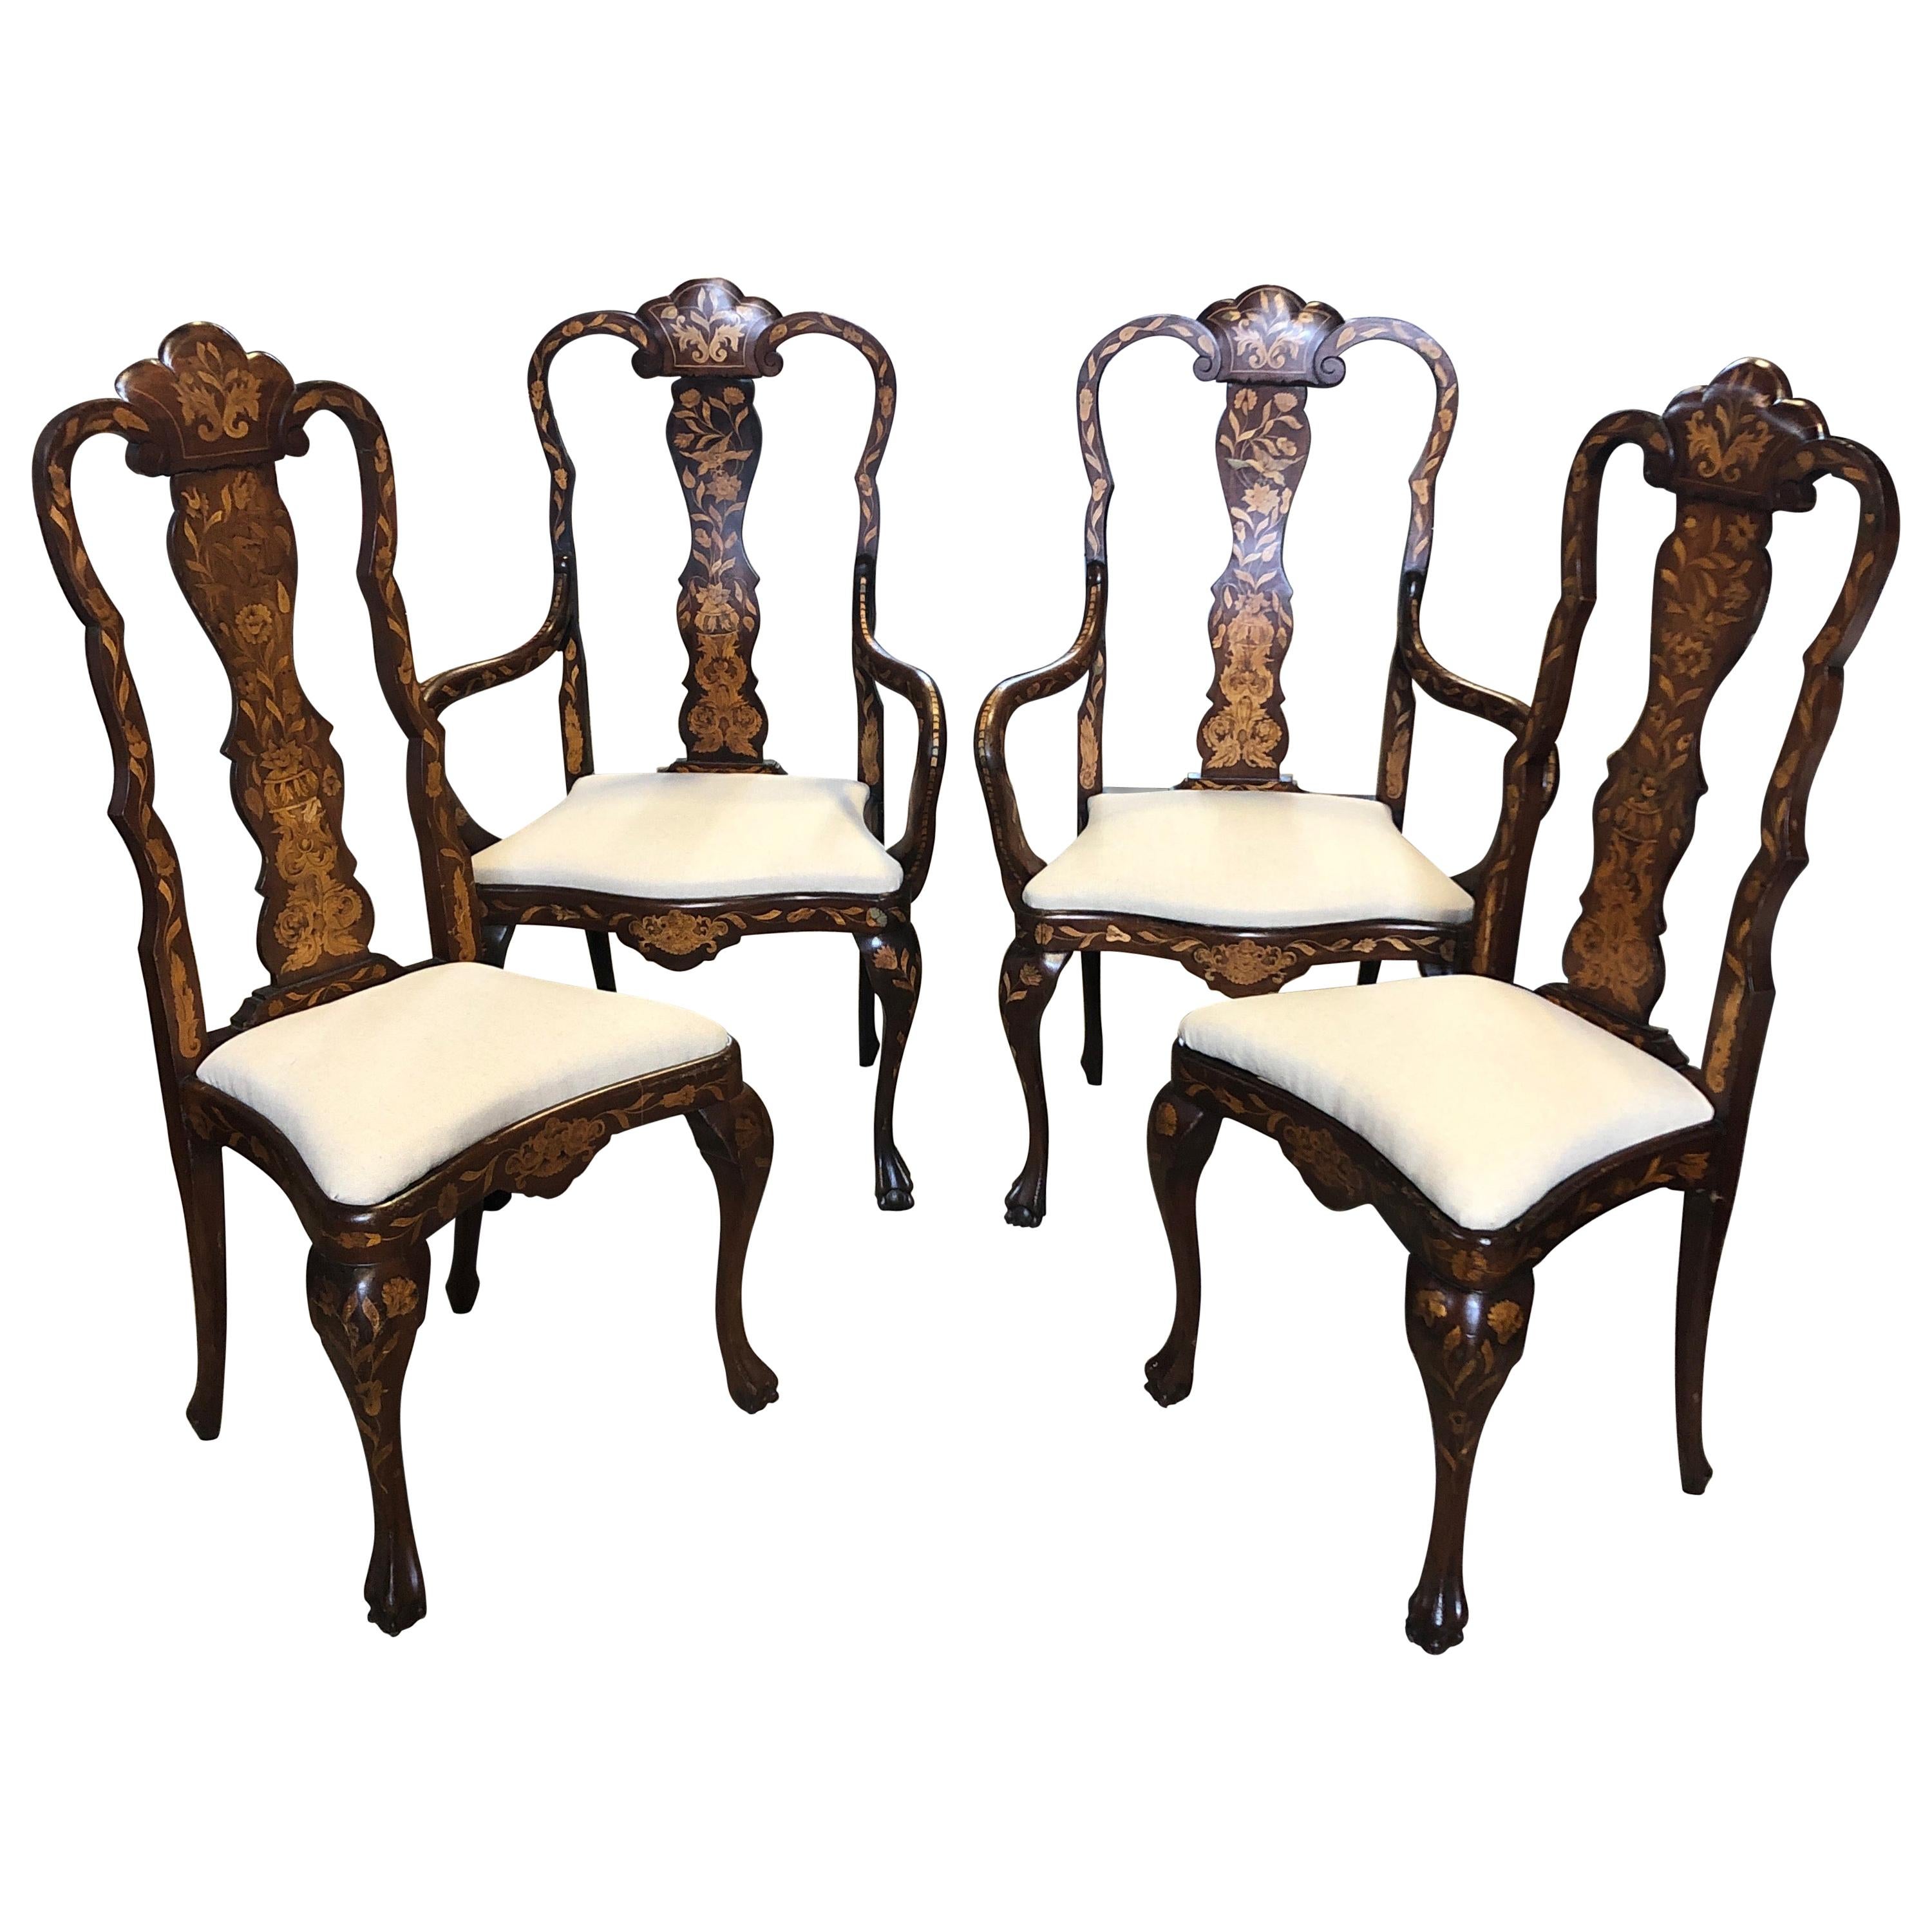 Set of 4 Remarkable Dutch Marquetry Dining Chairs